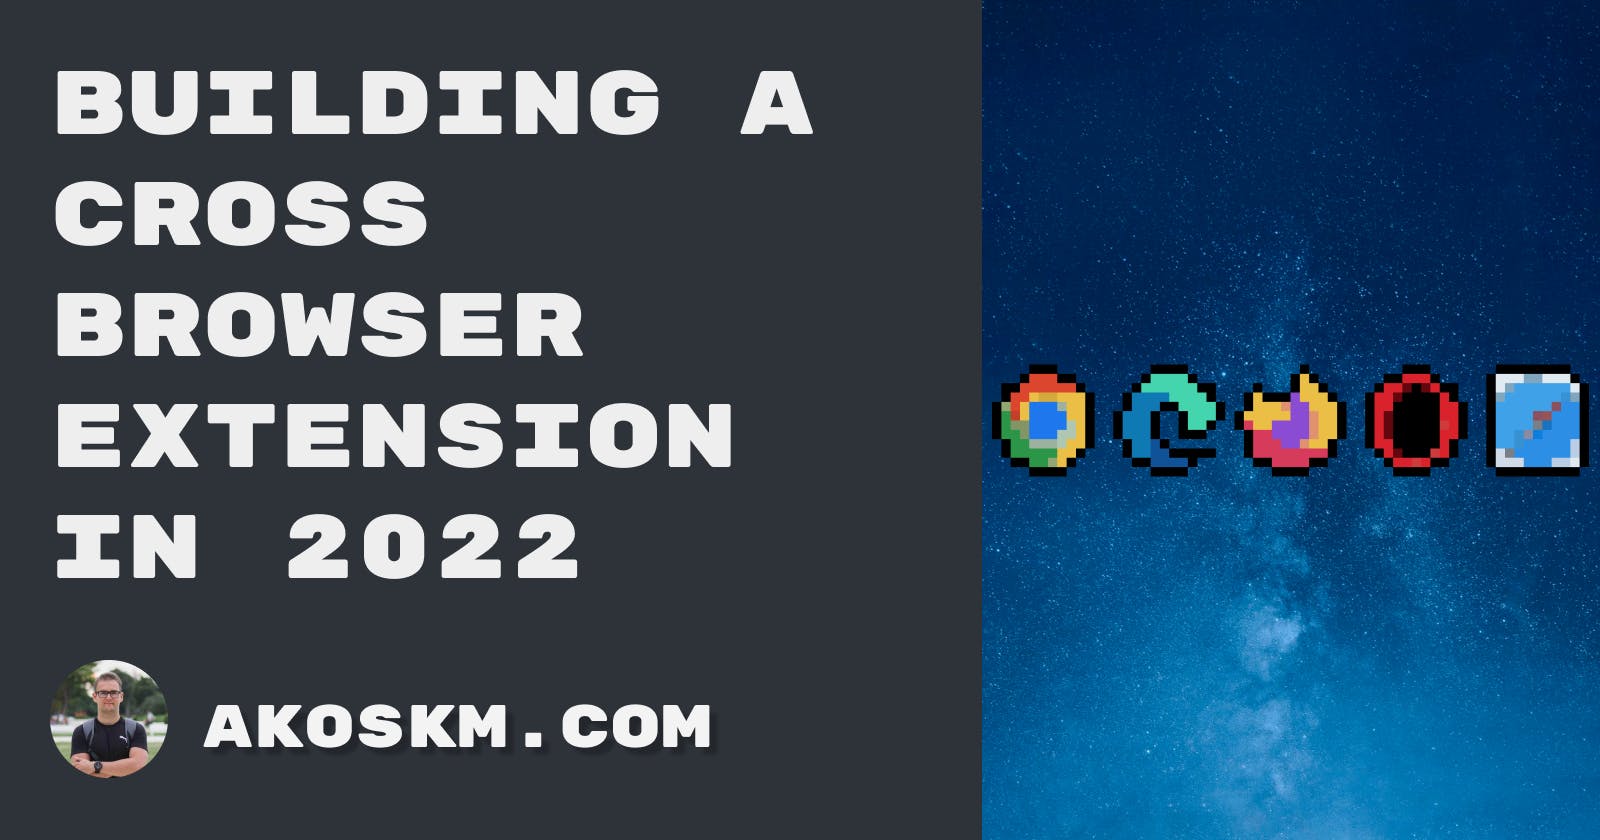 Building a Cross Browser Extension in 2022